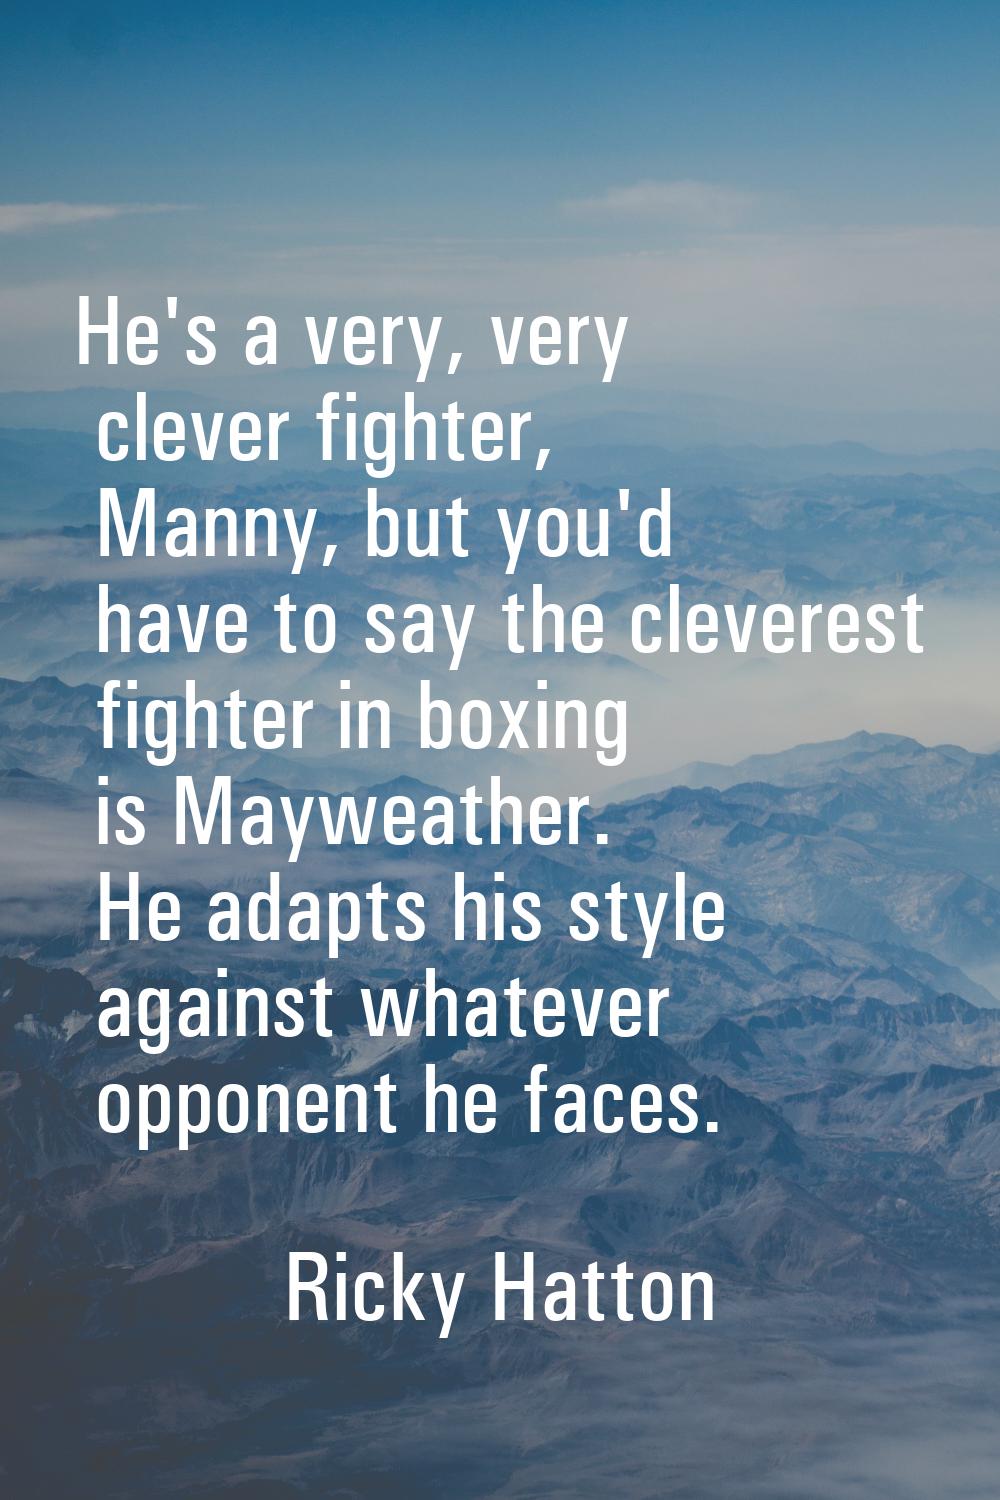 He's a very, very clever fighter, Manny, but you'd have to say the cleverest fighter in boxing is M